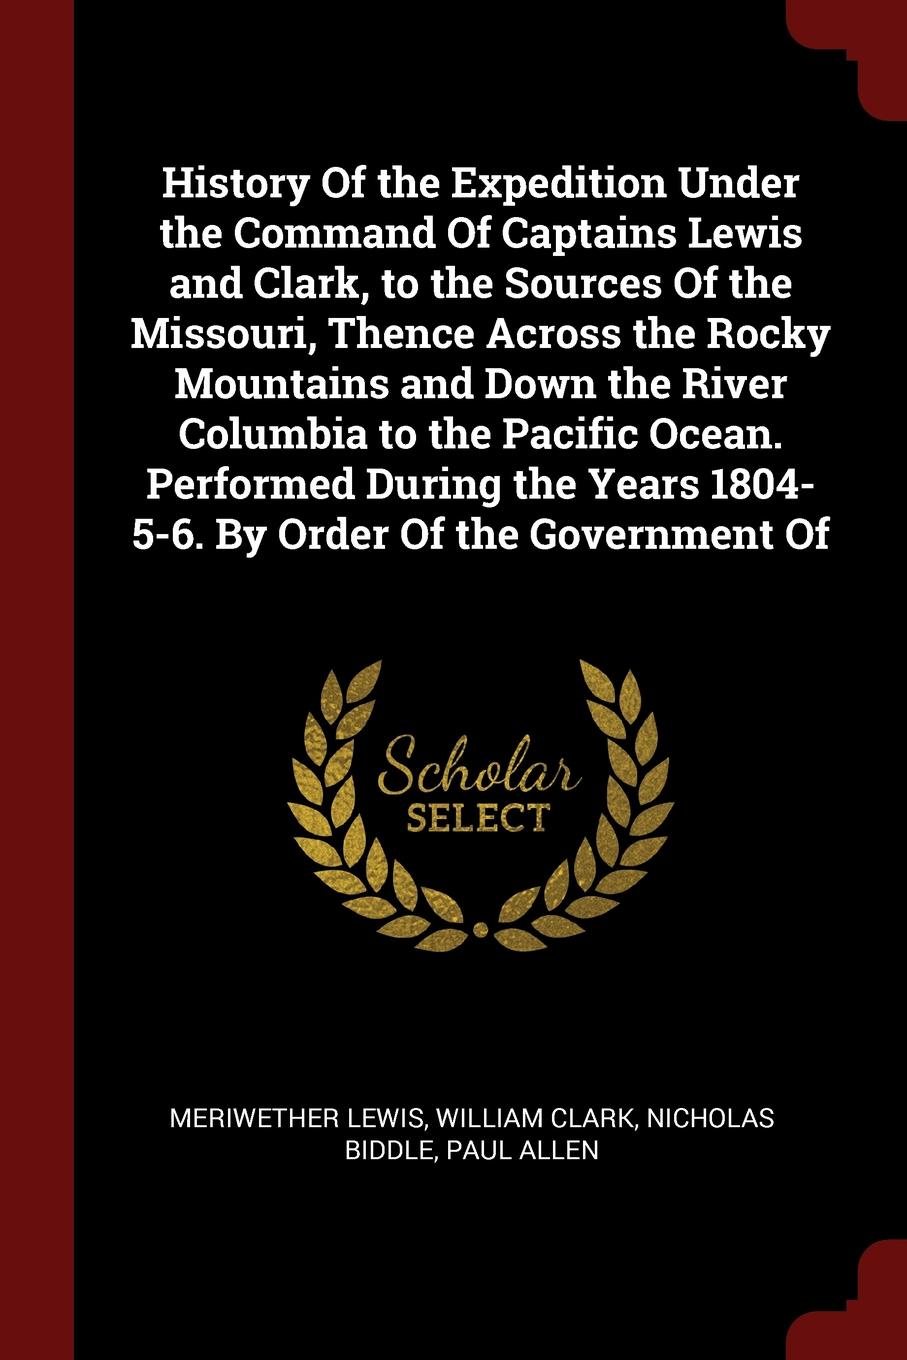 History Of the Expedition Under the Command Of Captains Lewis and Clark, to the Sources Of the Missouri, Thence Across the Rocky Mountains and Down the River Columbia to the Pacific Ocean. Performed During the Years 1804-5-6. By Order Of the Gover...